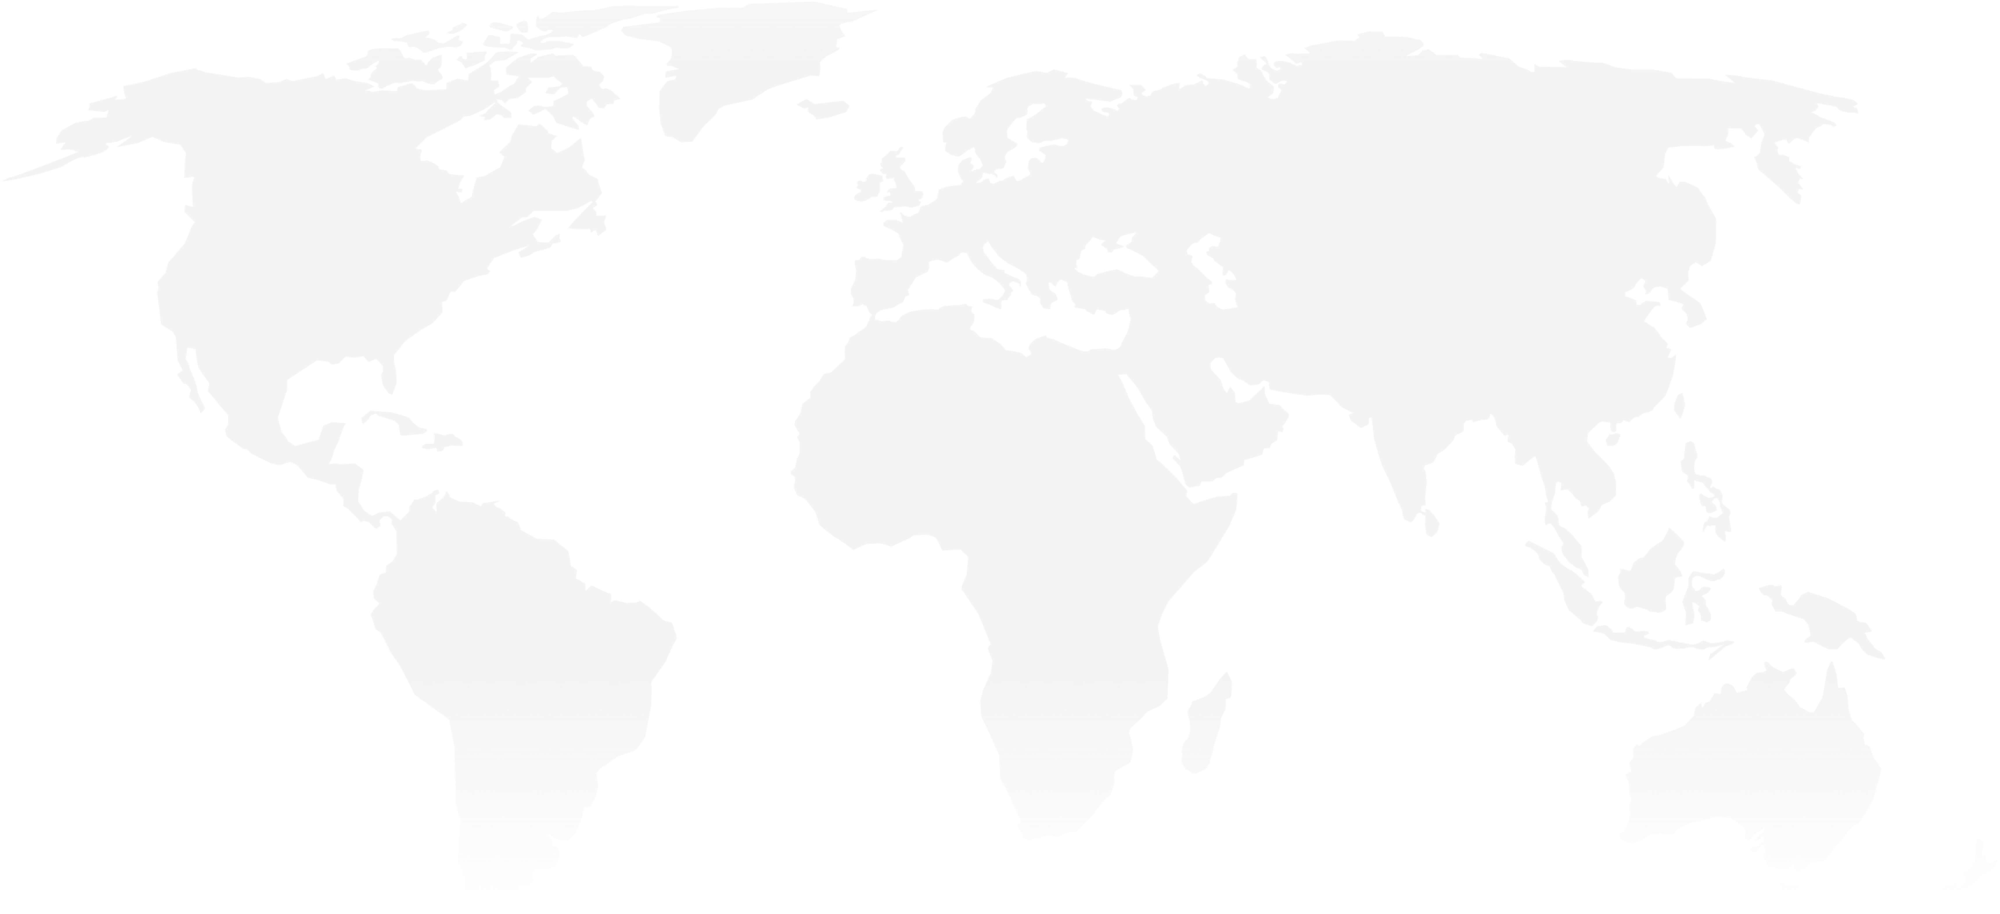 World map in light grey on white background